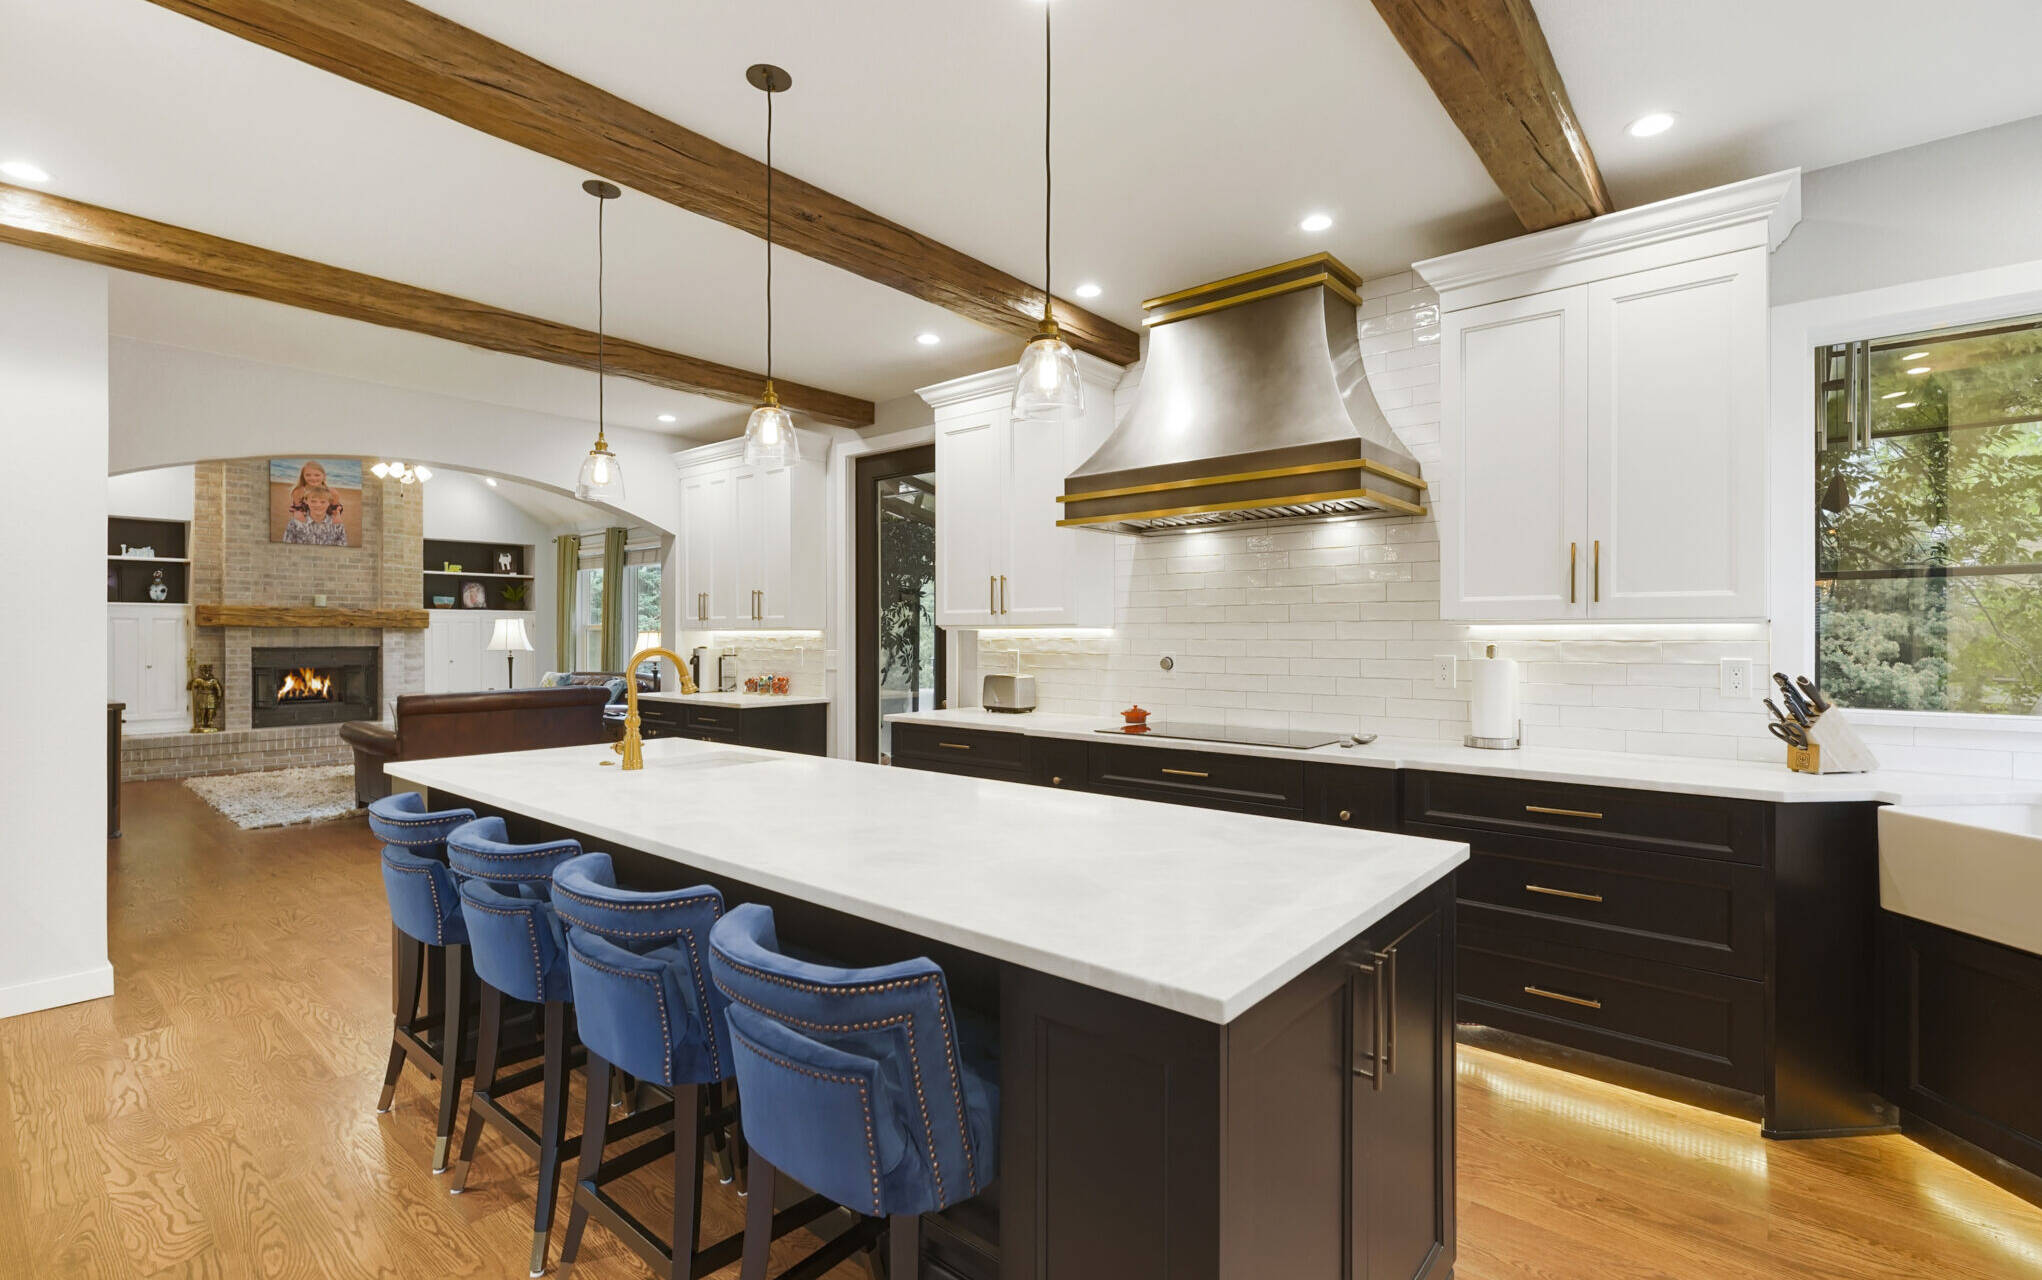 BKC Kitchen and Bath painted maple cabinet wood by David Bradley Cabinetry